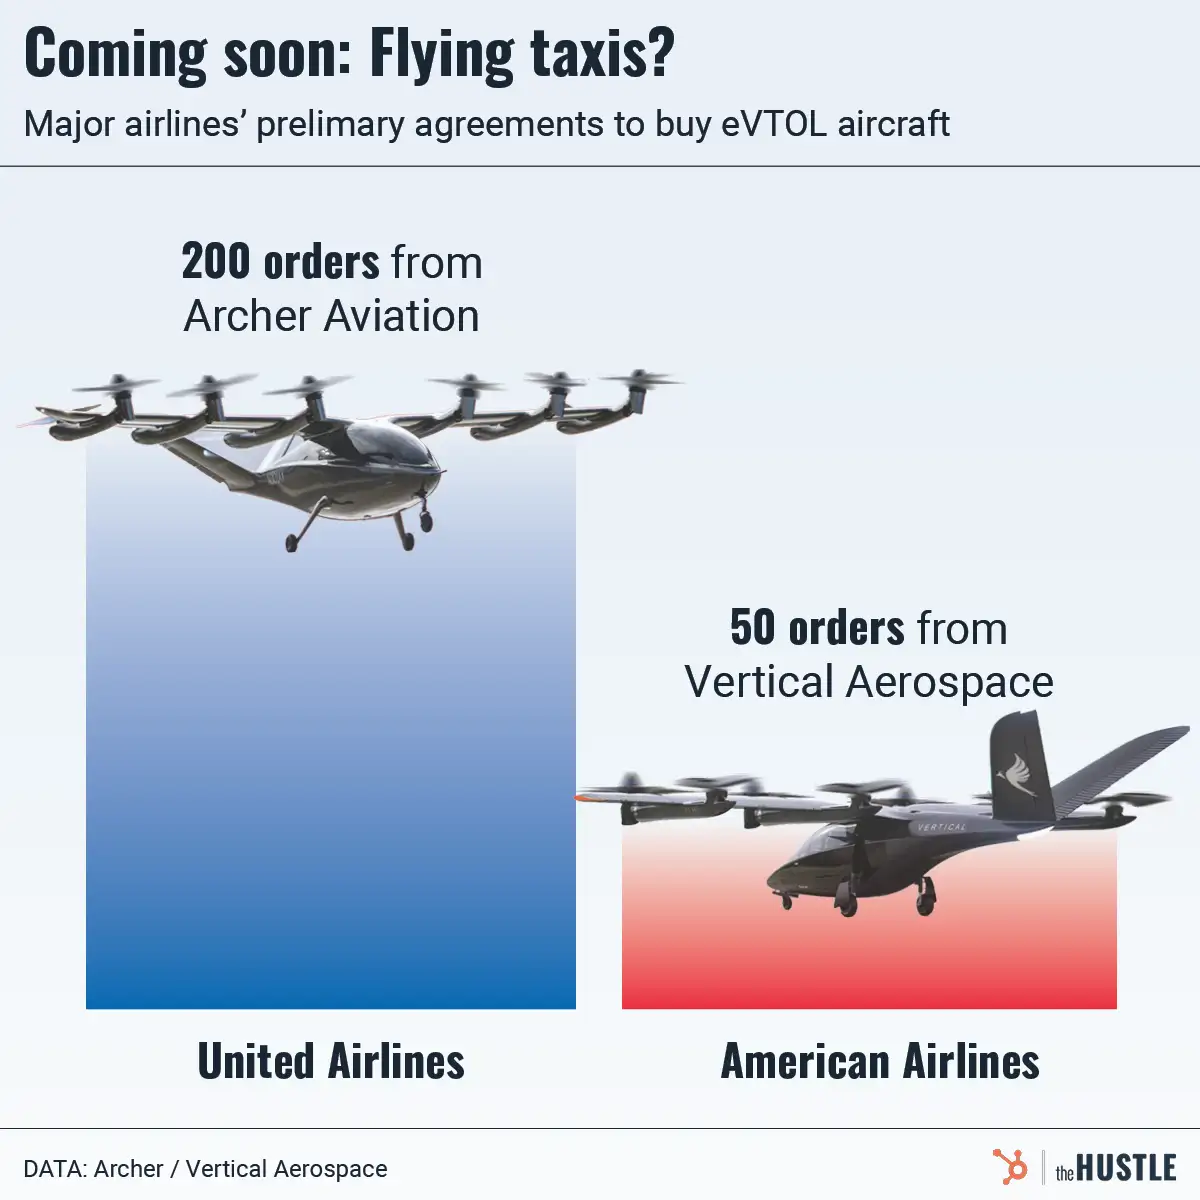 United Airlines just made a down payment on flying taxis